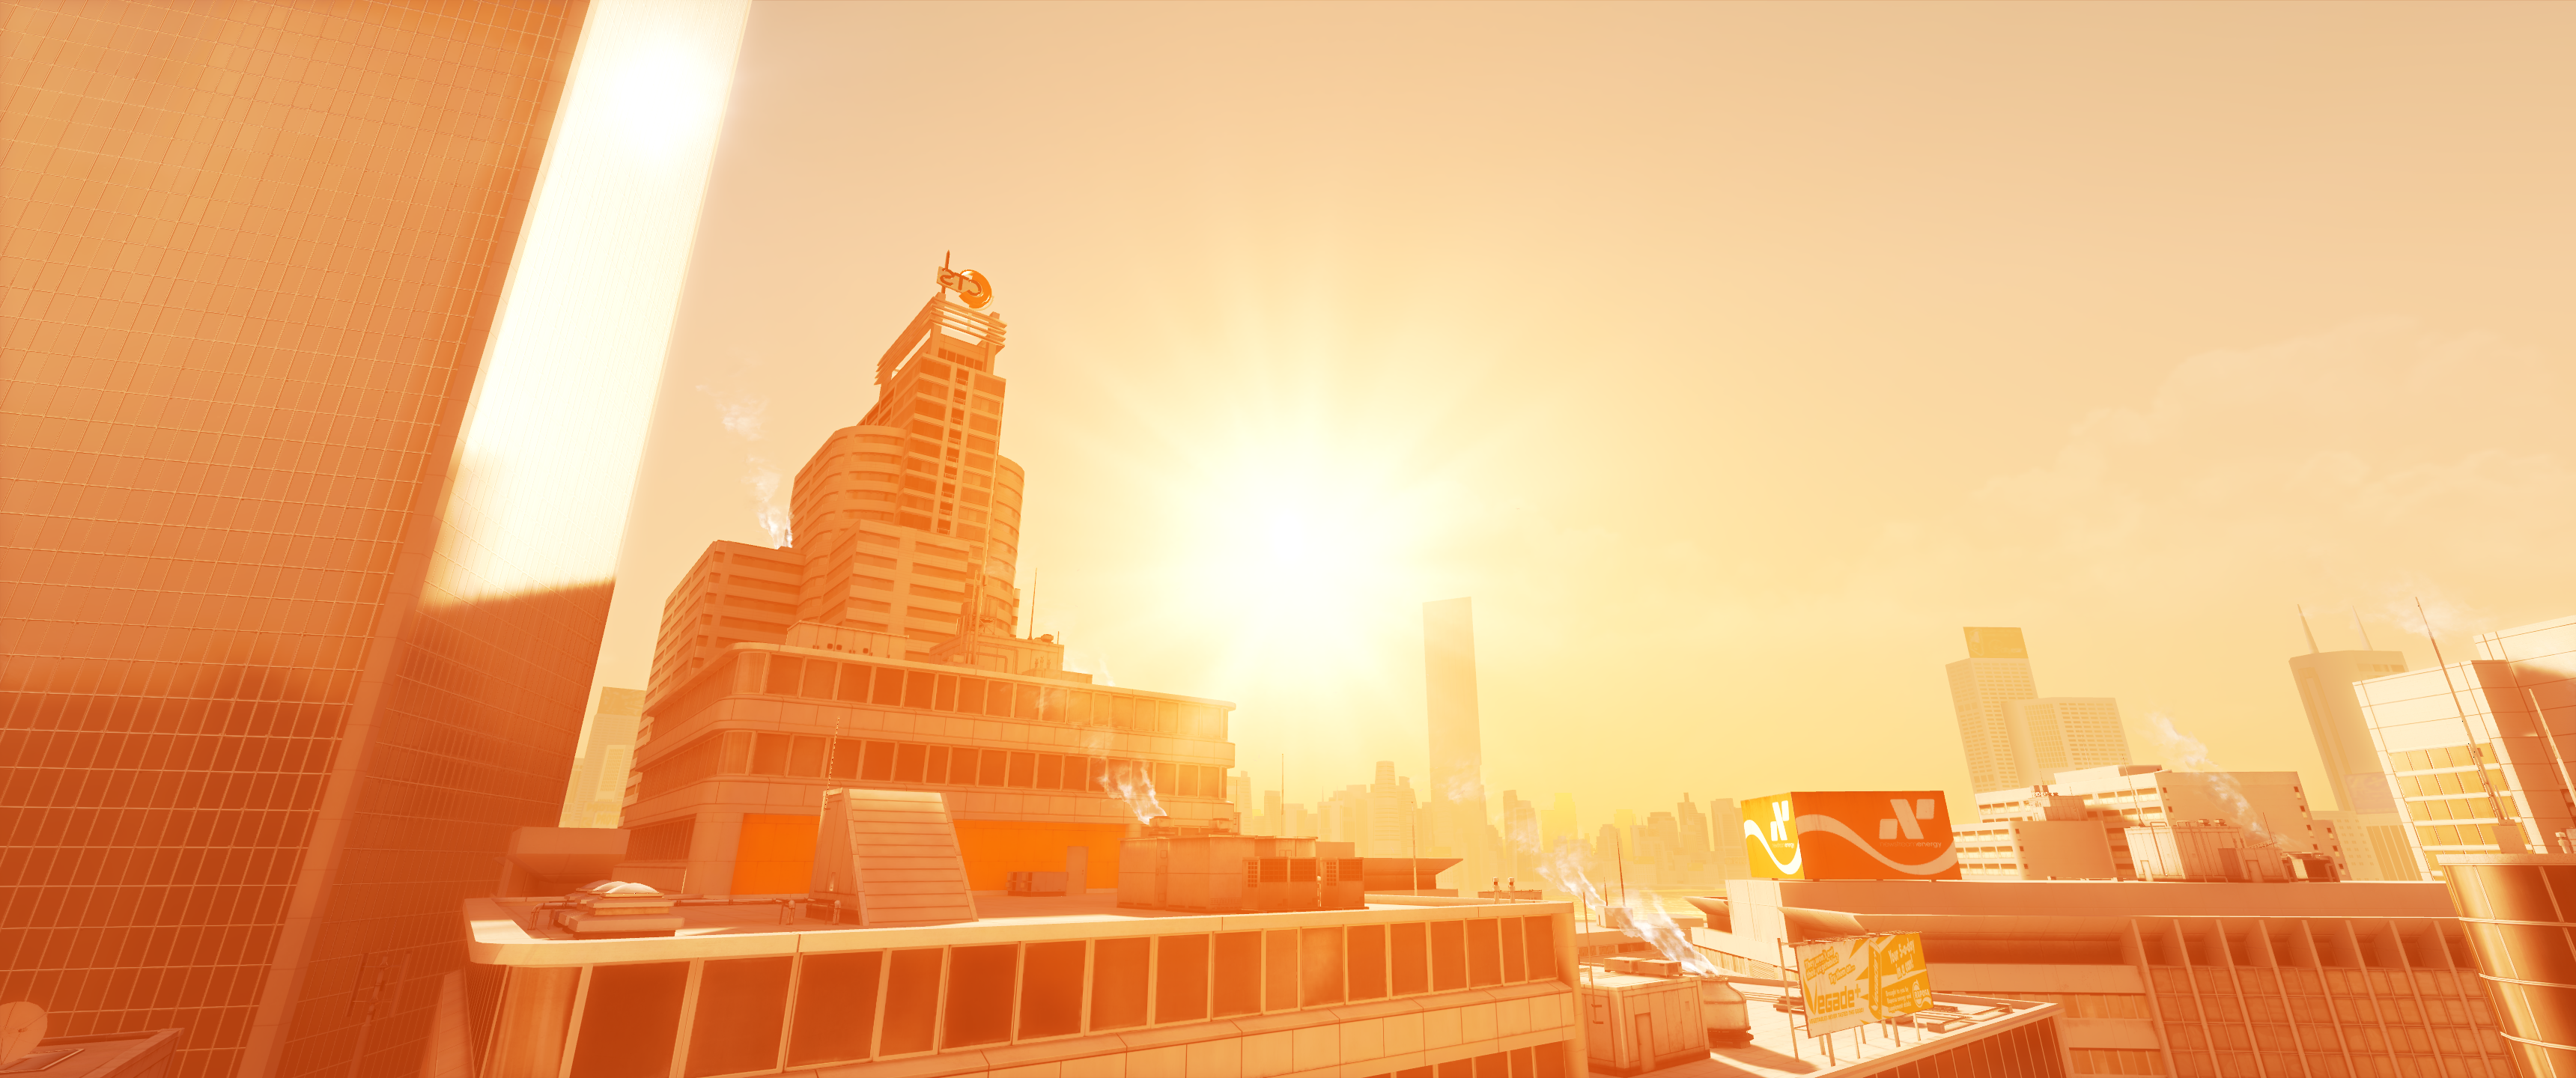 Mirrors Edge Sunset Video Games Electronic Arts Sky Building Sun Rooftops 3440x1440